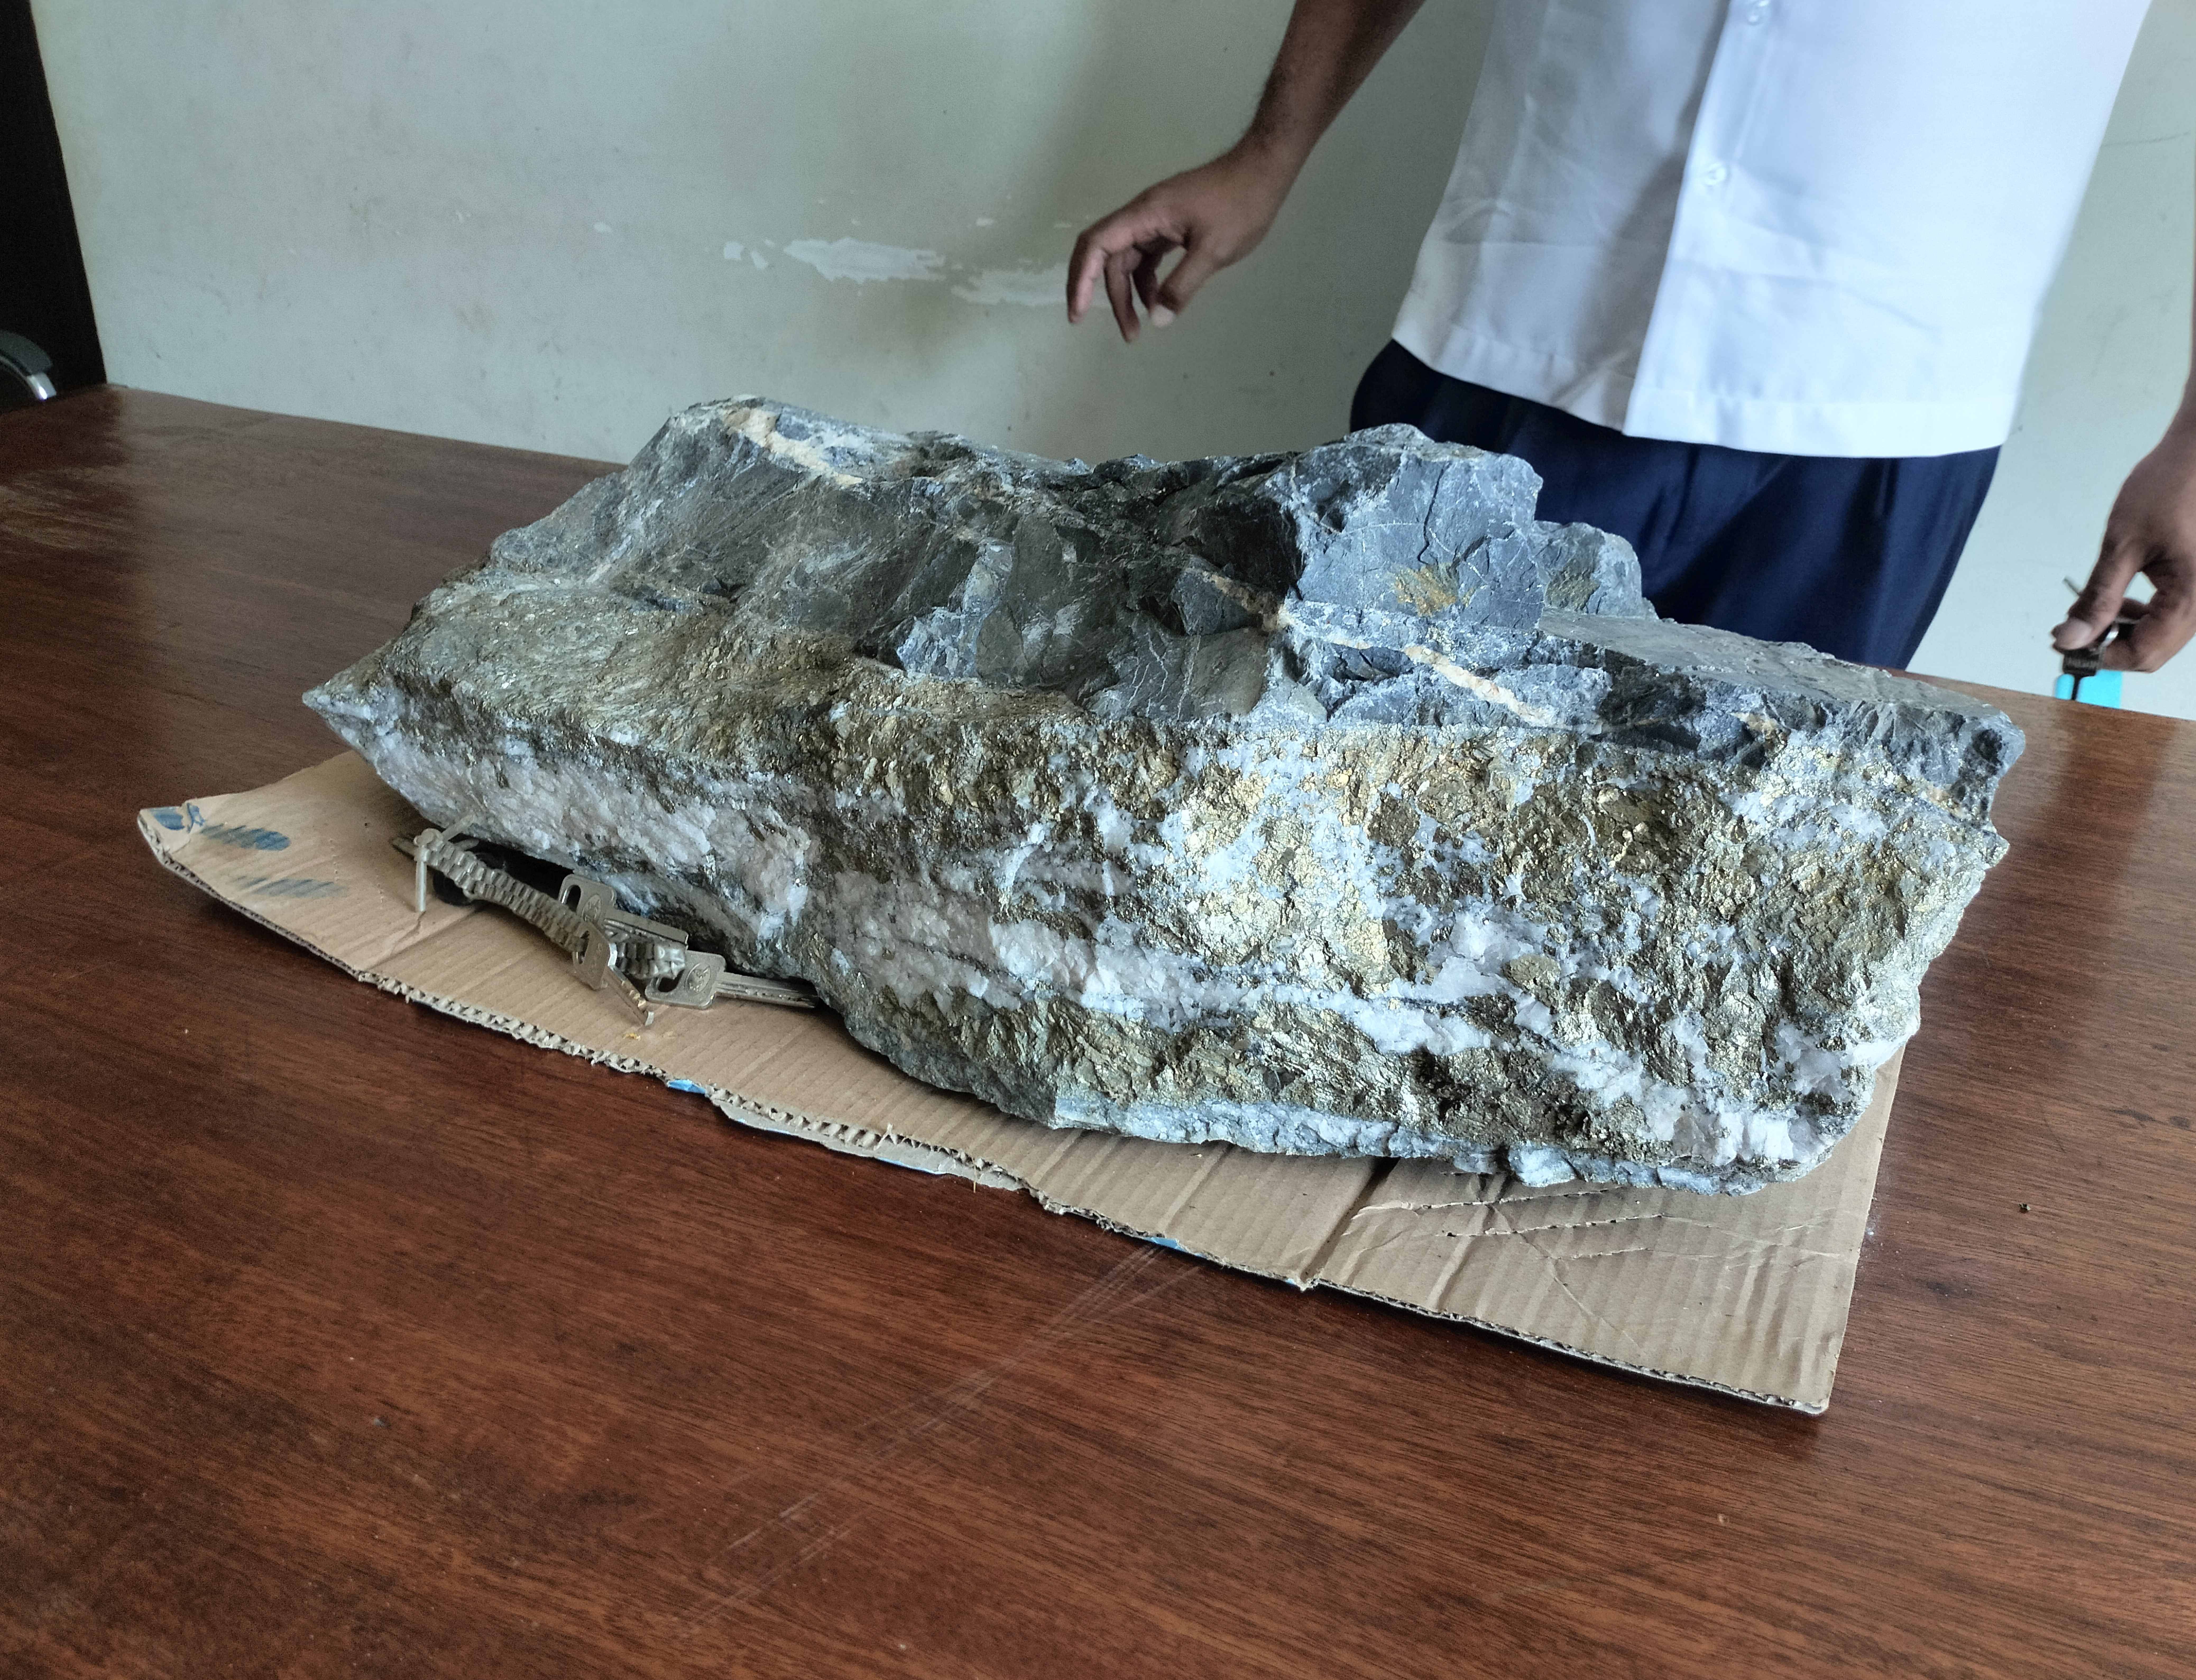 On the desk, inside the foyer by the entrance to the Kampong Thom Provincial Department of Mines and Energy, a large lump of gold ore sits on a desk. Staff confirmed the ore is from Late Cheng's mine in Prey Lang. Image by Gerald Flynn / Mongabay.